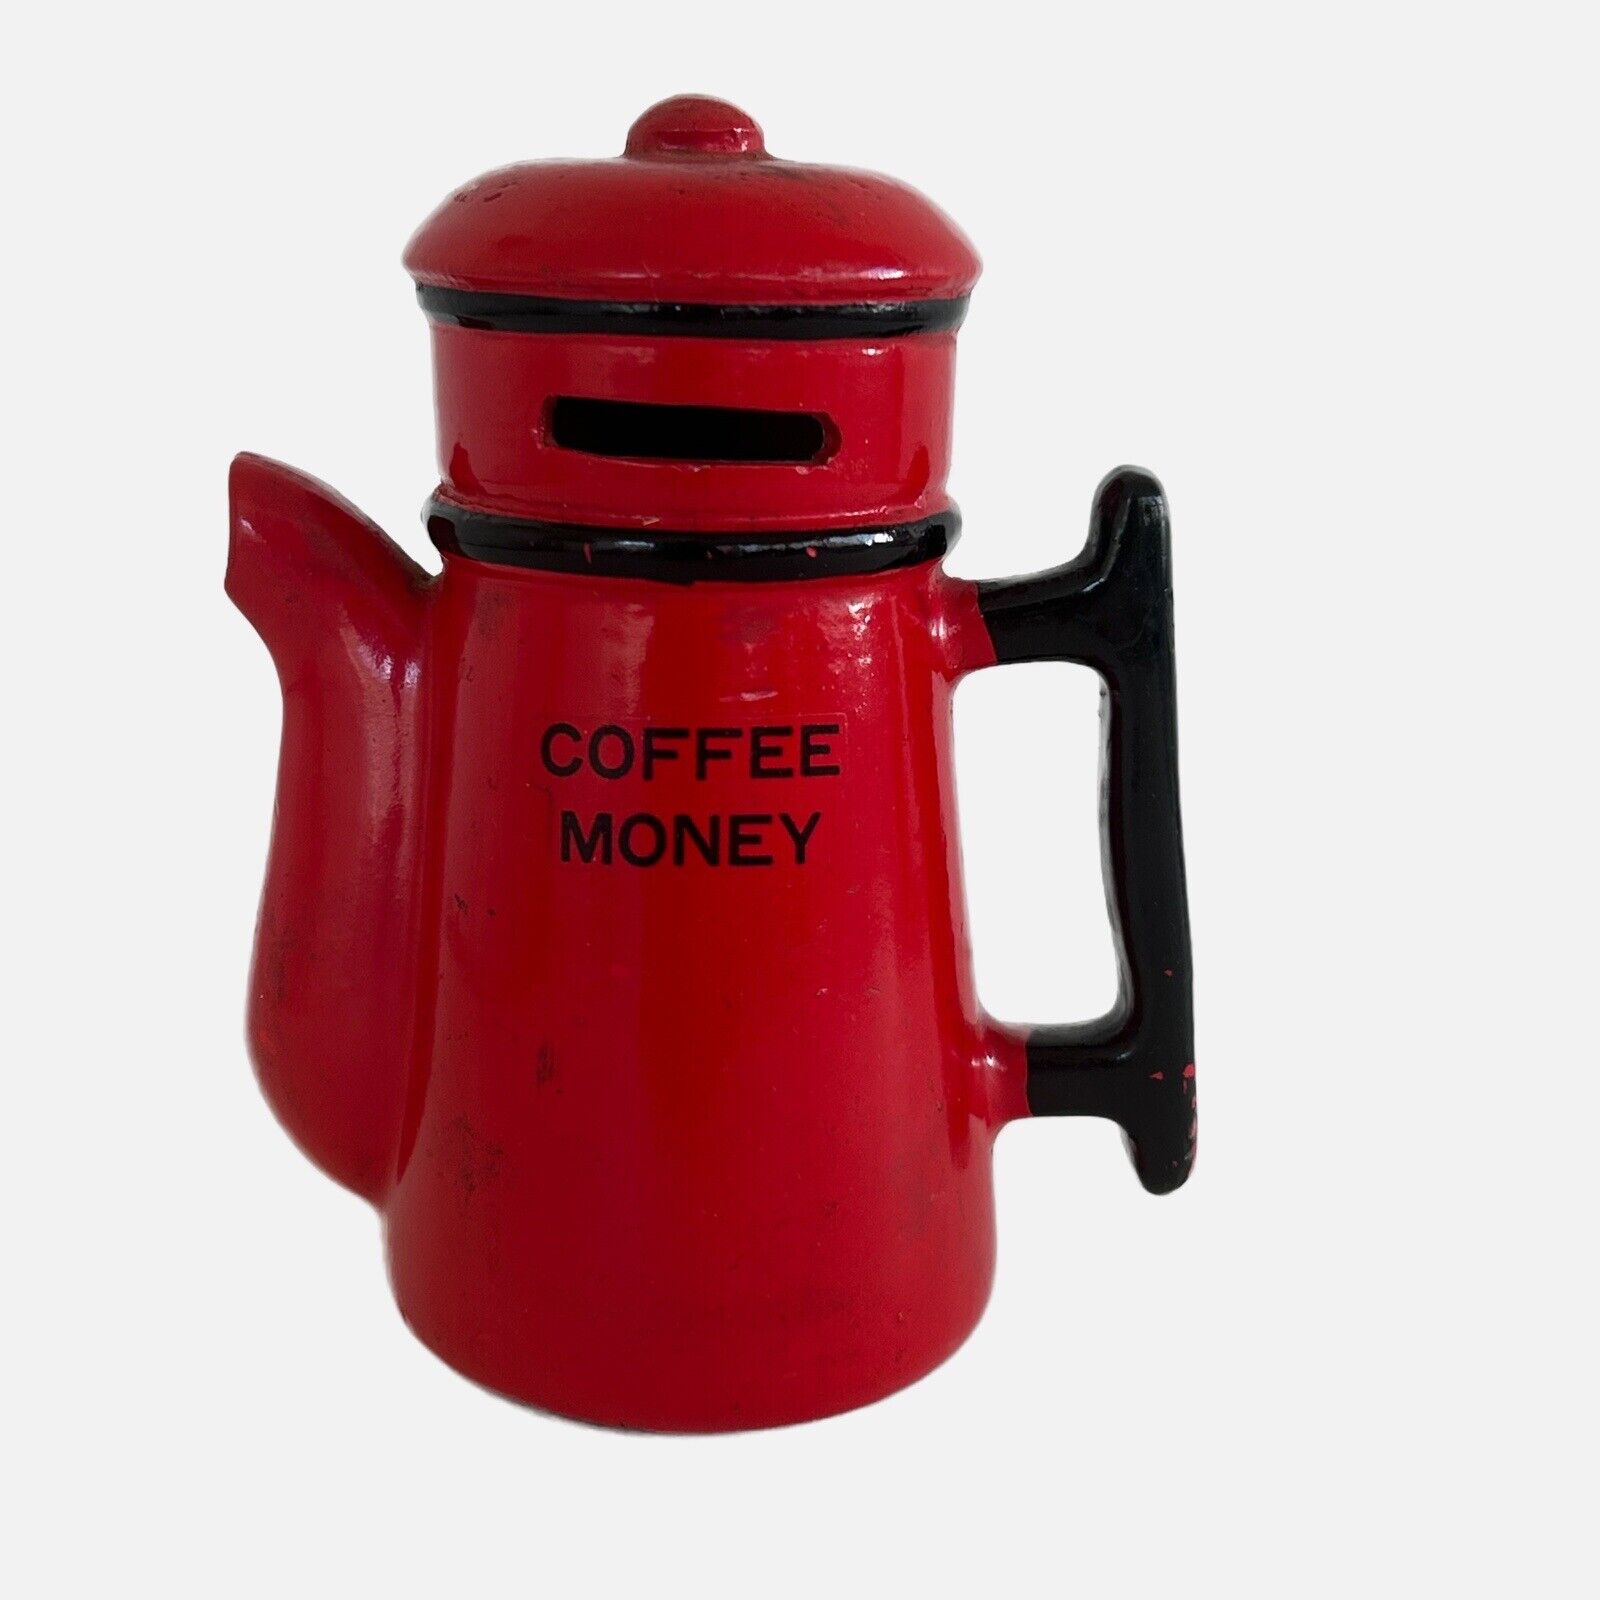 Vintage 1960\'s Red Coffee Money Coffee Pot Ceramic Bank Kitschy MCM Collectible*